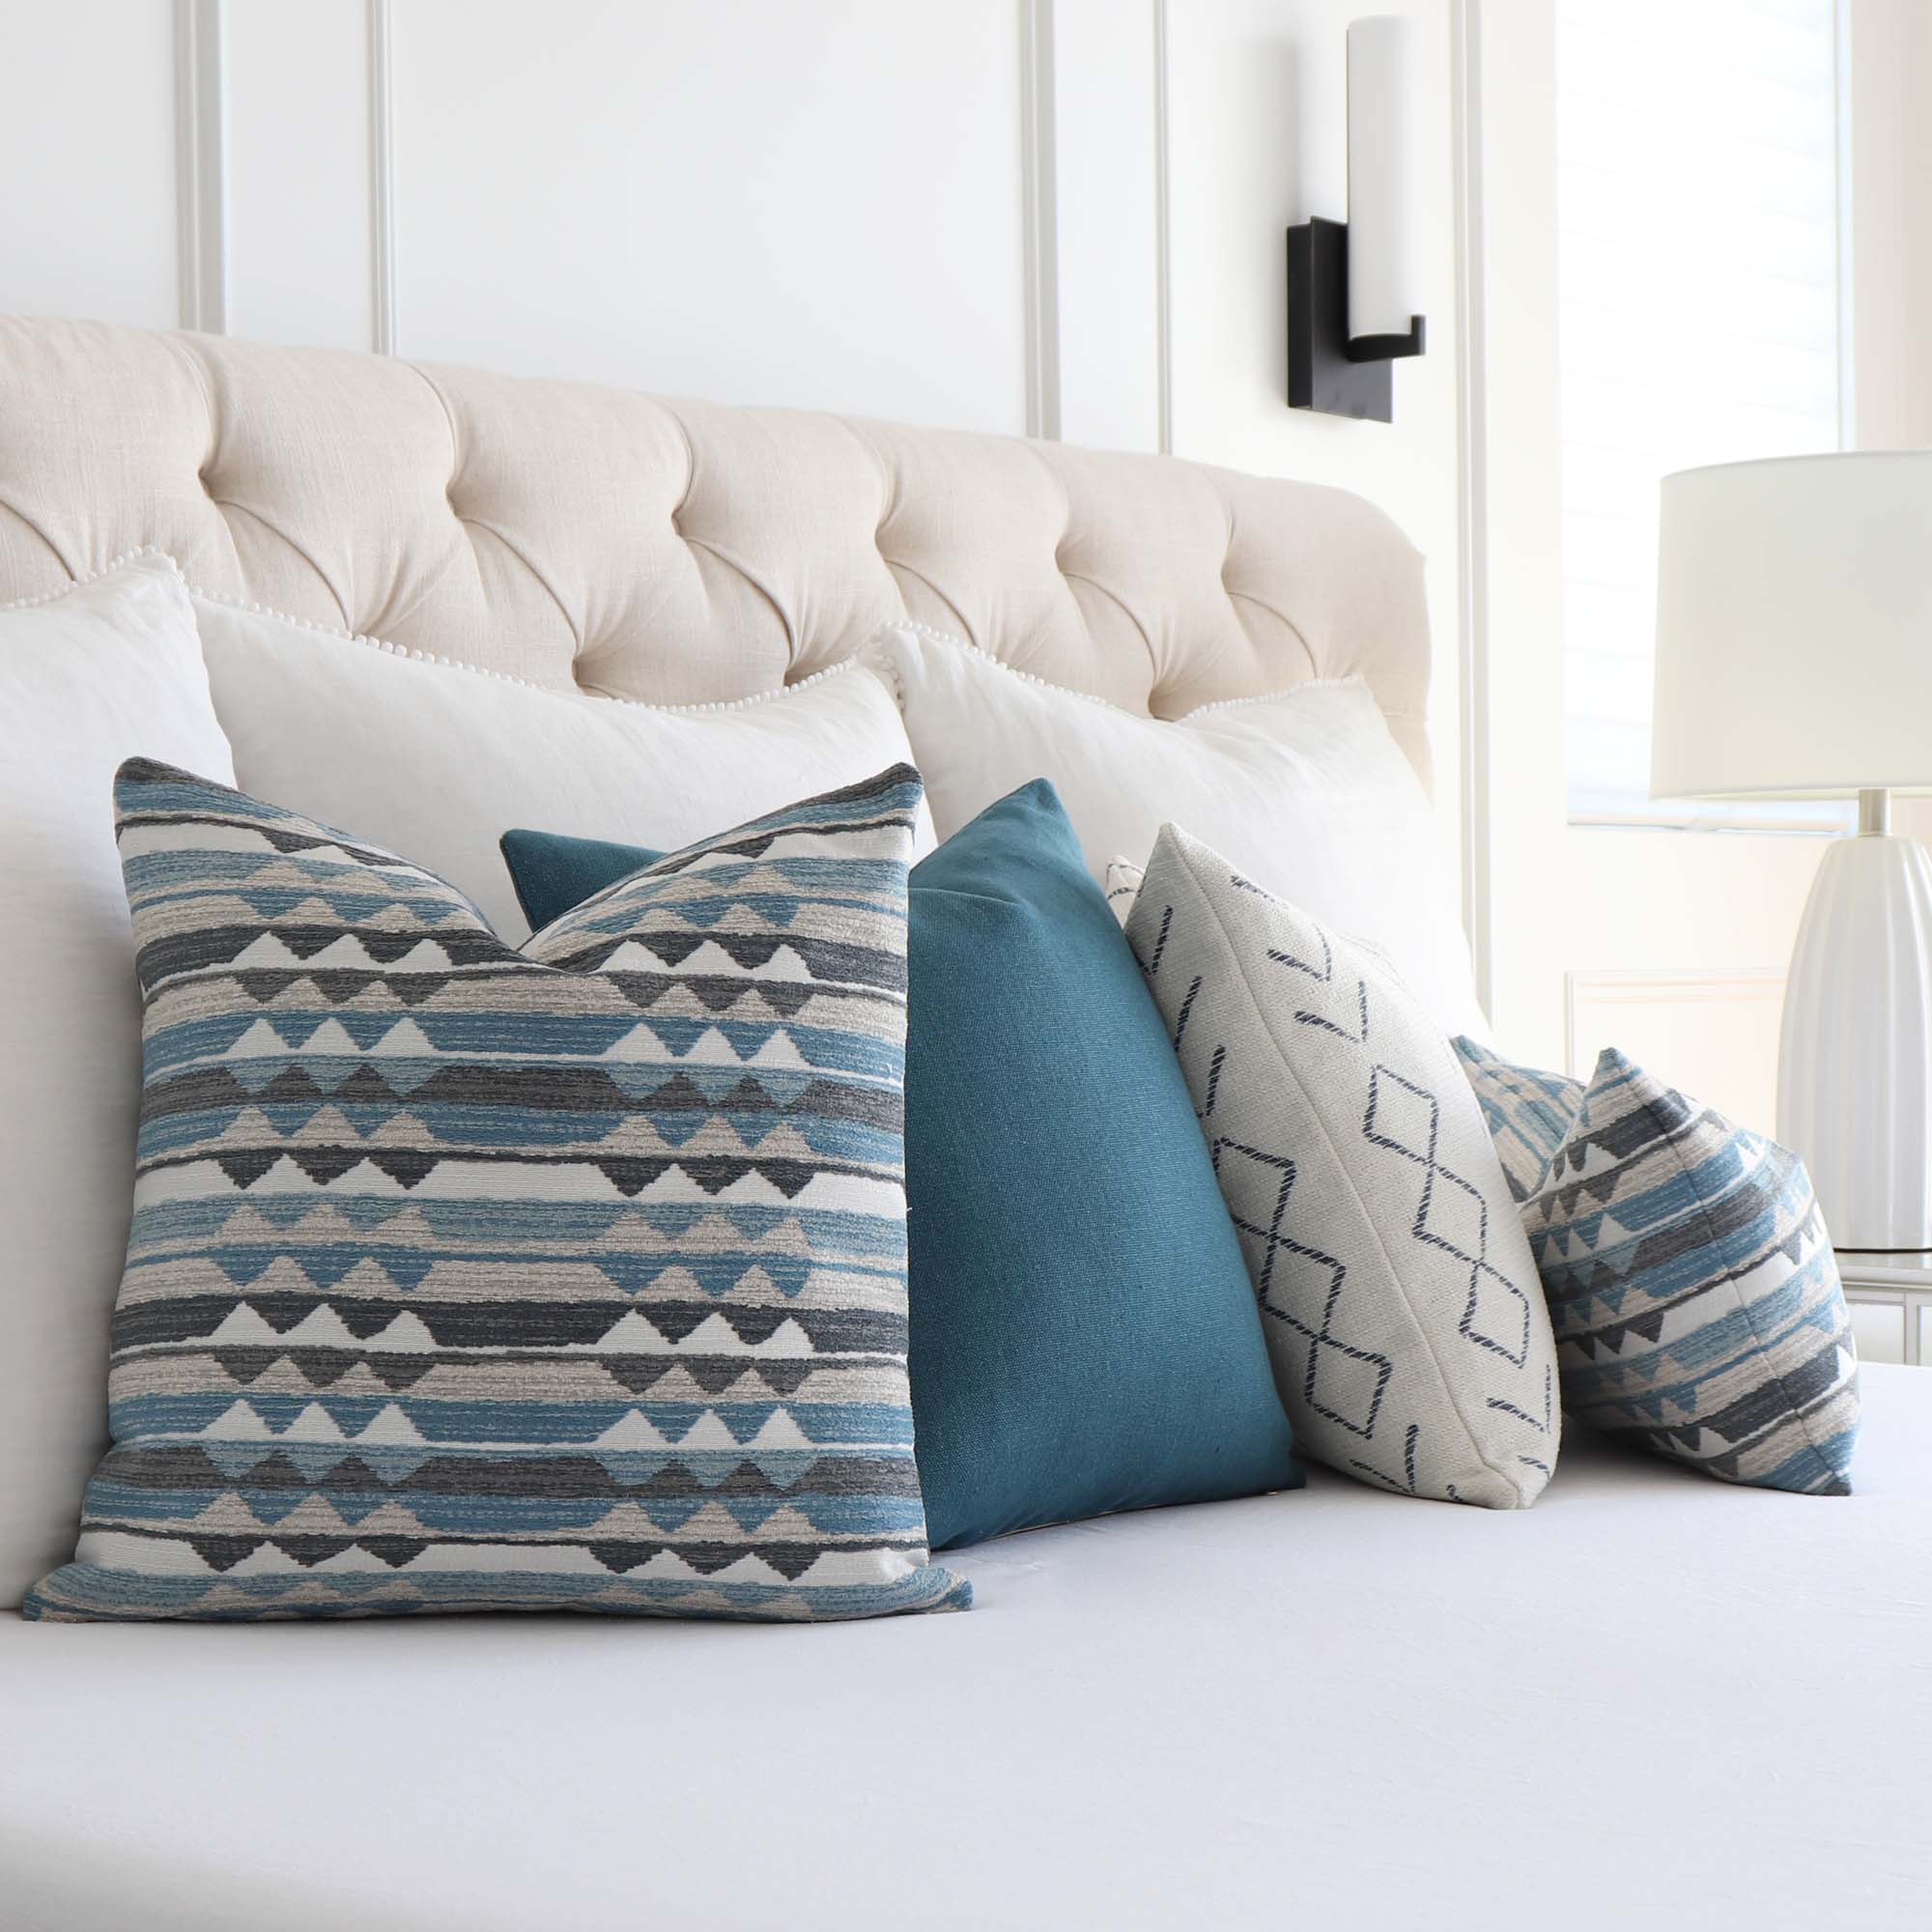 https://www.chloeandolive.com/cdn/shop/files/Thibaut_InsideOut_Performance_Fabric_Saranac_Waterfall_Blue_Woven_Ikat_Kilim_Patttern_Designer_Luxury_Throw_Pillow_Cover_in_Bedroom_with_Matching_Throw_Pillows_2000x.jpg?v=1692677727